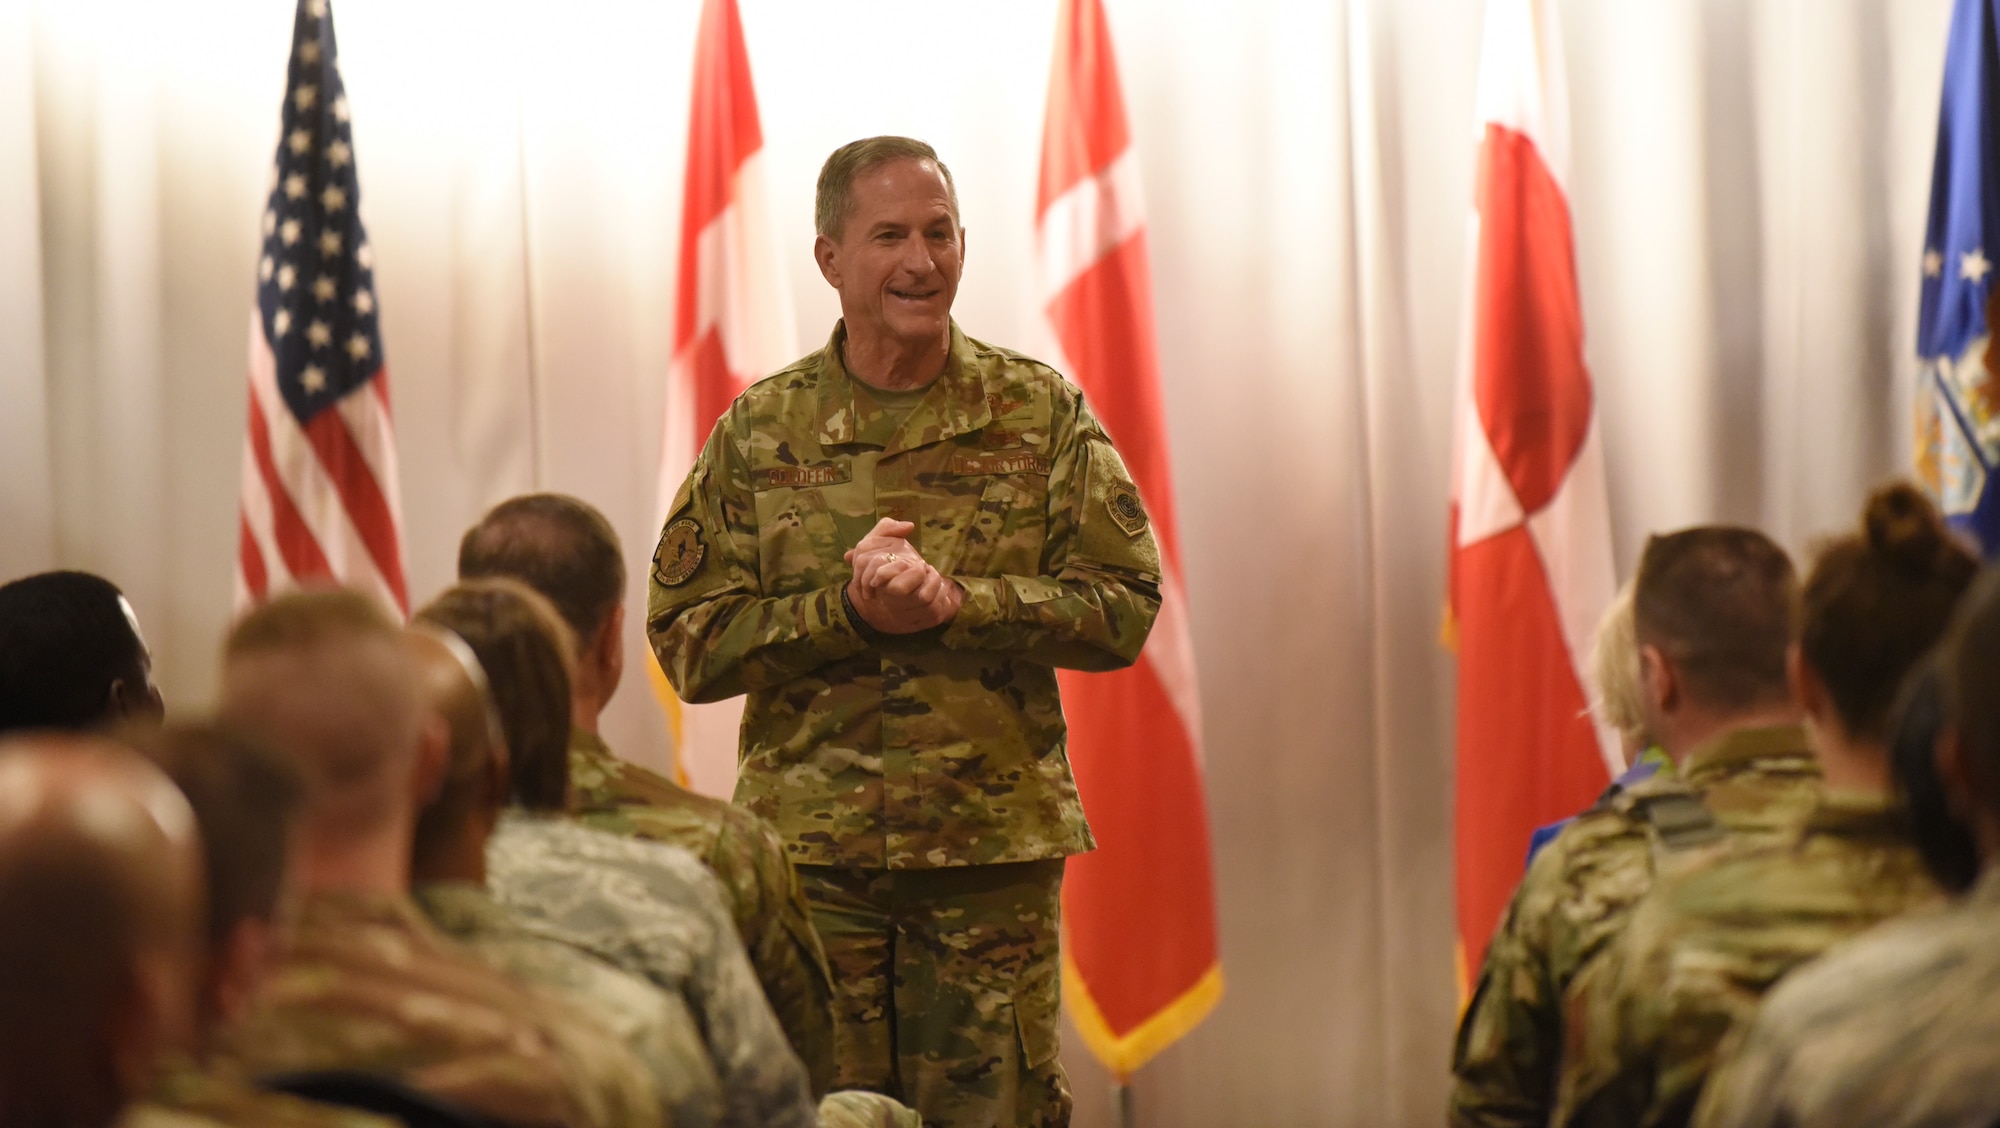 The 21st Air Force Chief of Staff David Goldfein speaks to the Airmen of the 821st Air Base Group during an all call at Thule Air Base, Greenland July 20, 2019. During the all call, Goldfein covered topics such as multi-domain operations, joint leaders and teams, and the importance of squadrons in the Air Force. (U.S. Air Force photo by Staff Sgt. Alexandra M. Longfellow)